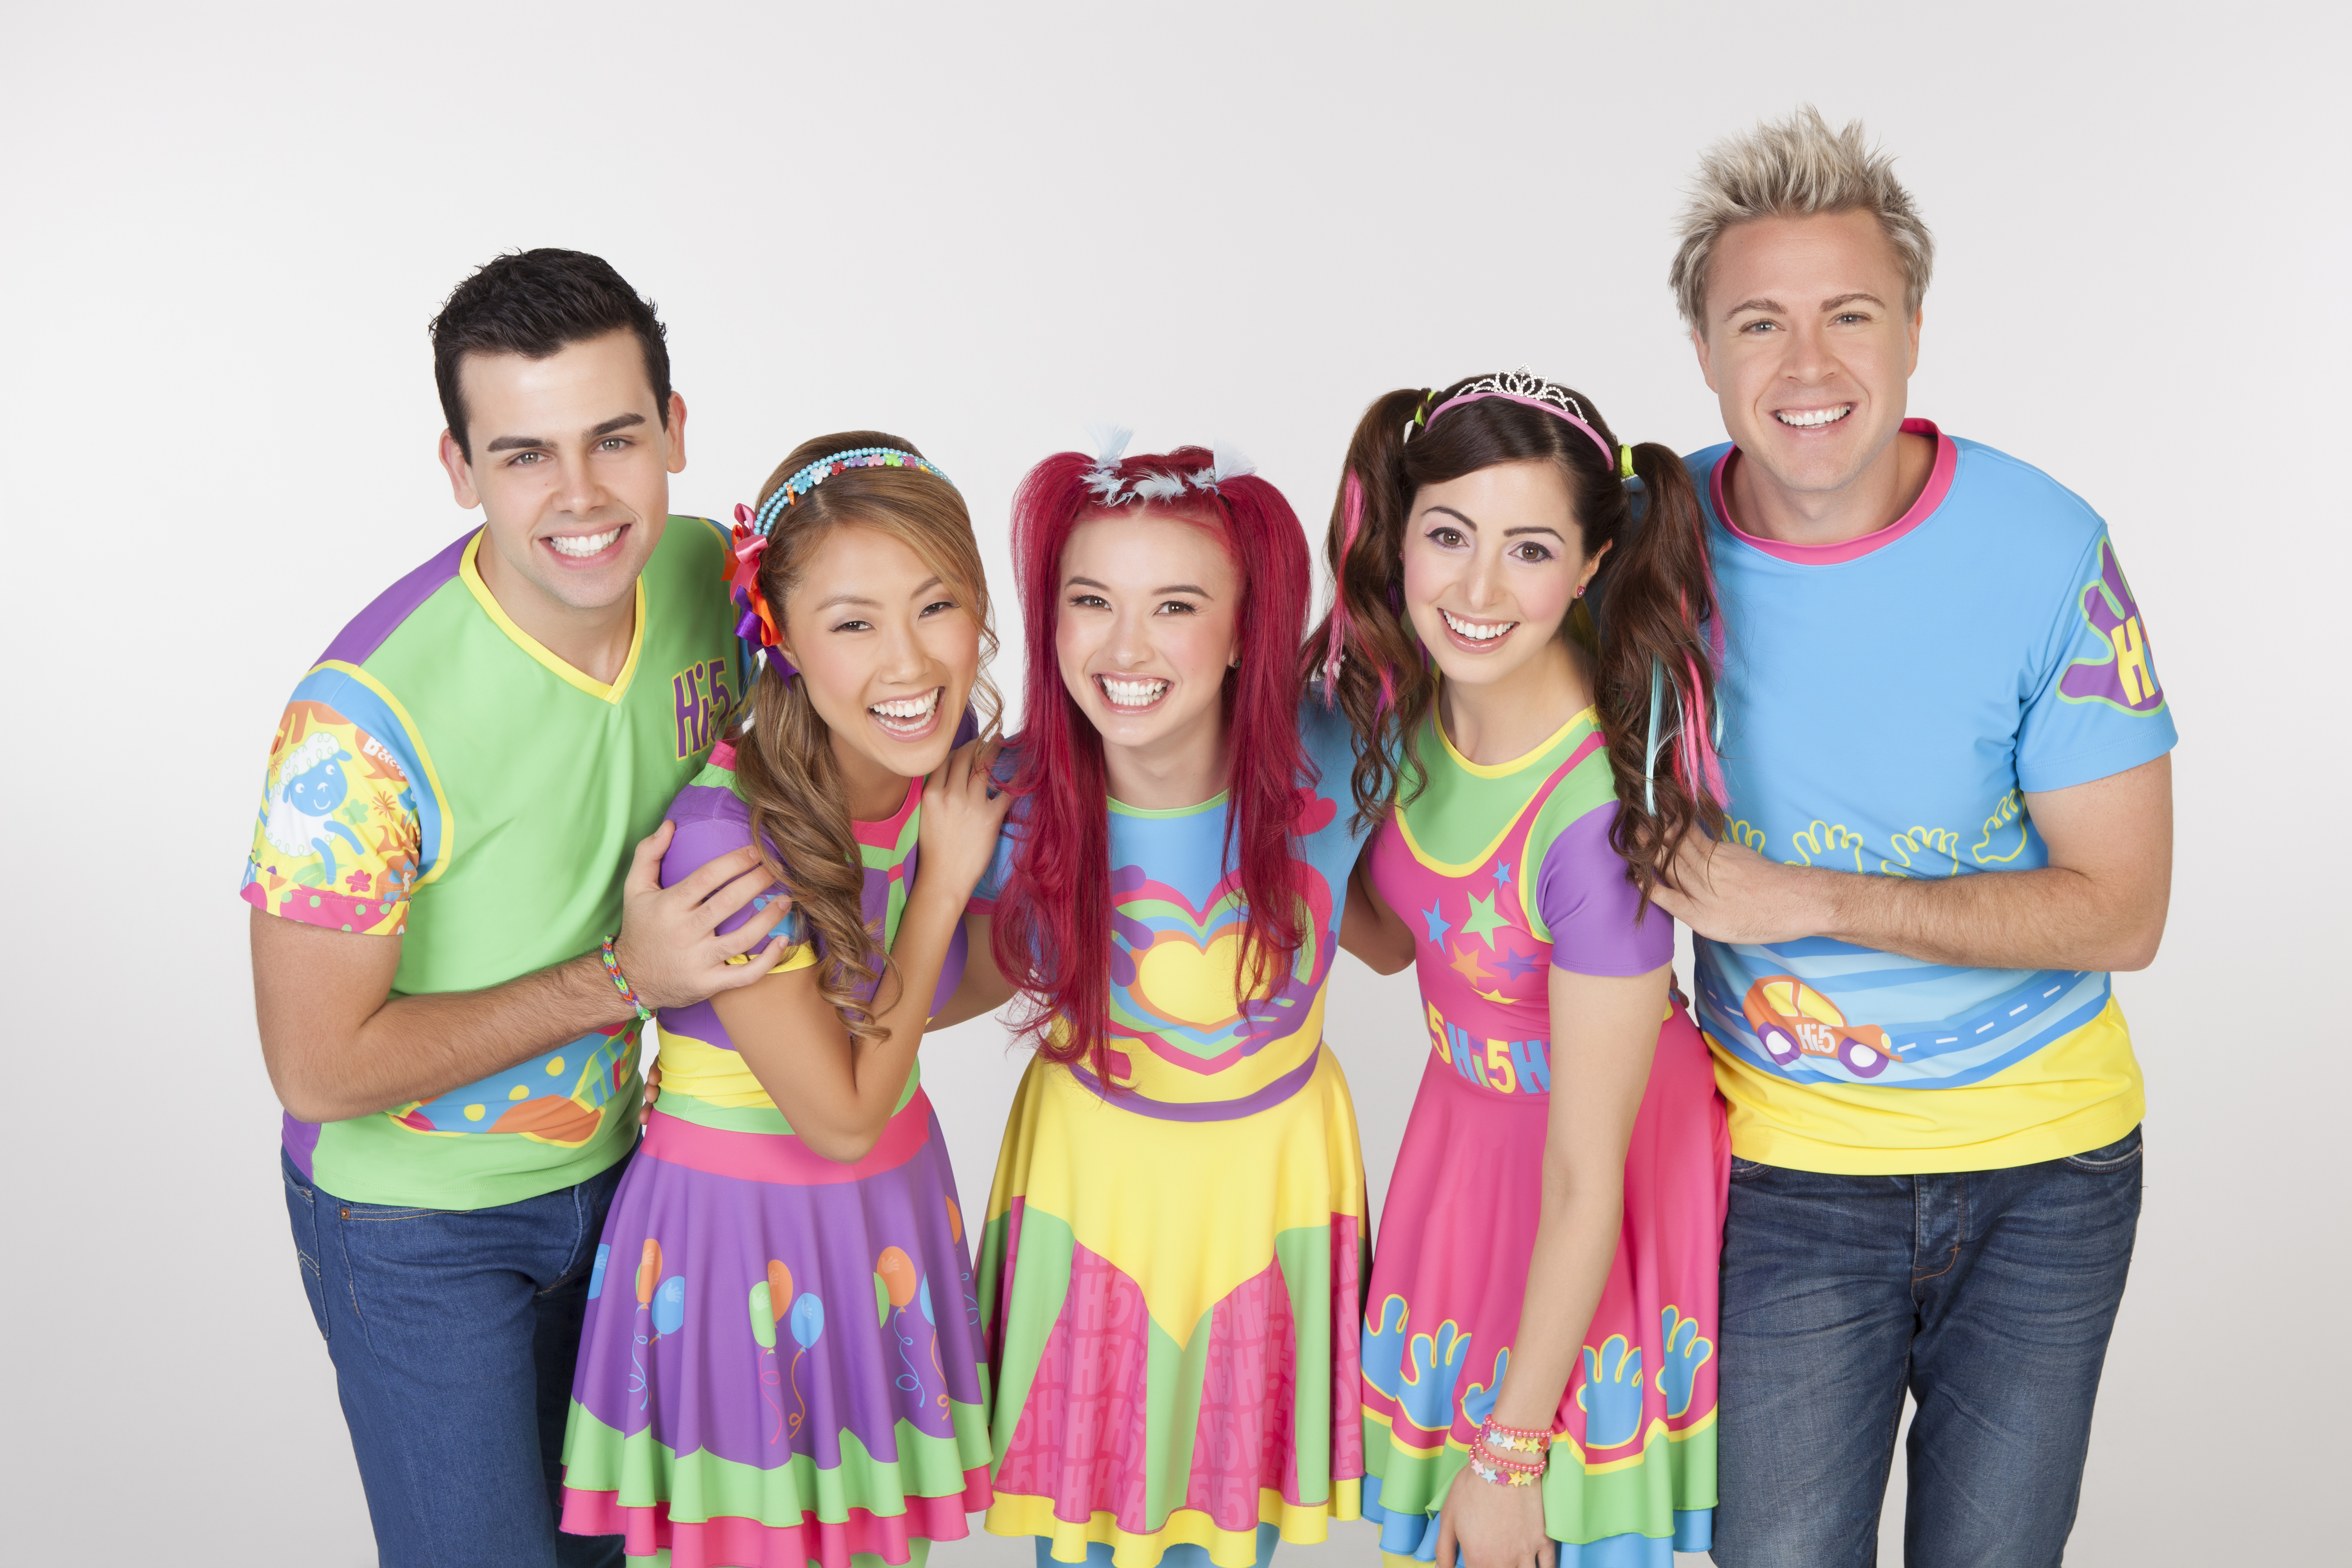 HI-5 House hits 2014 live show promises to be a sing-and-dance extravaganza...